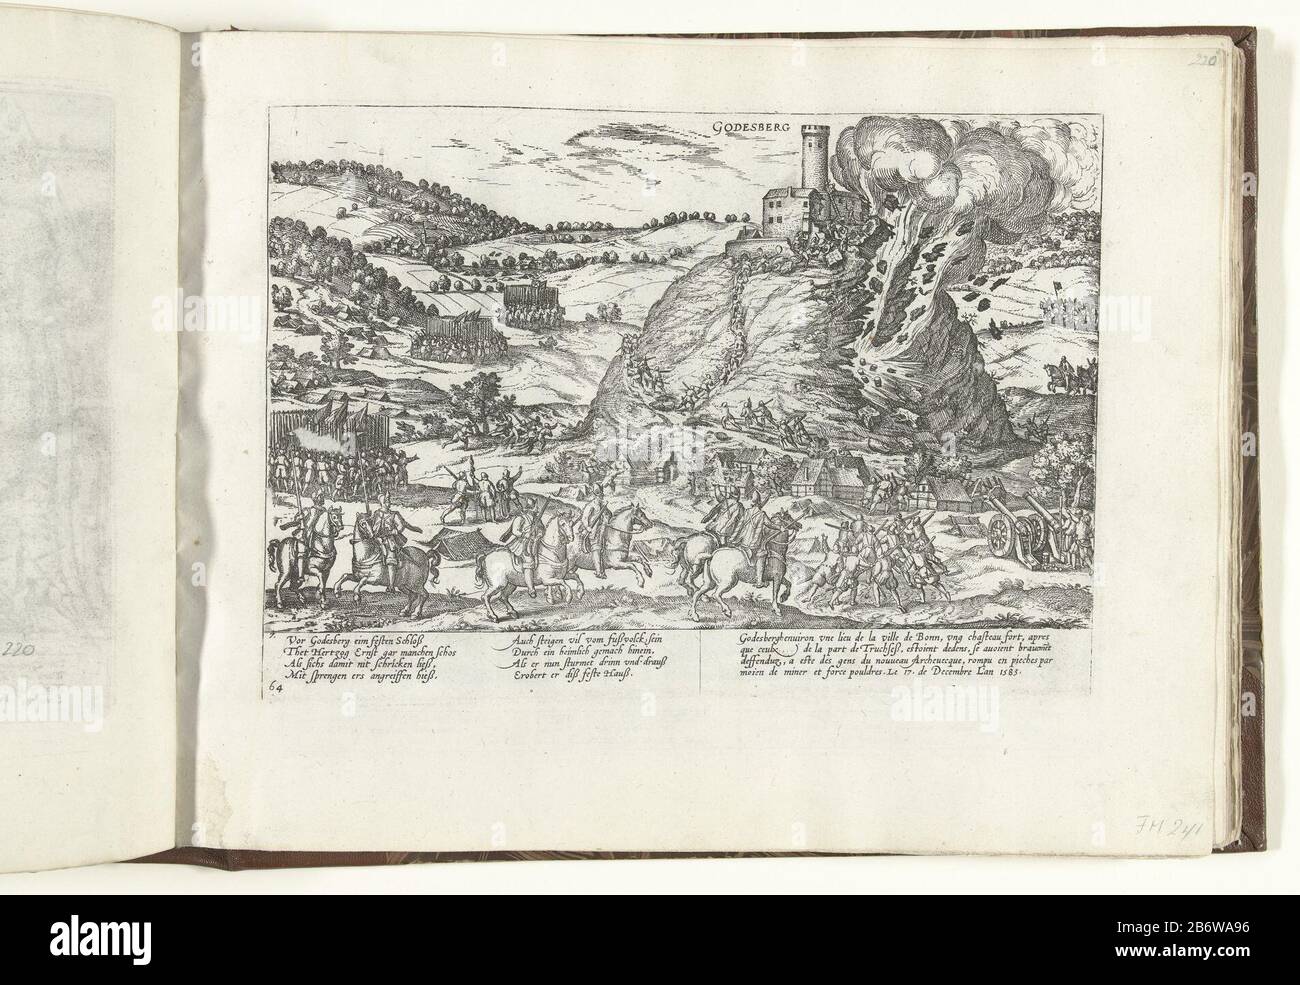 Inname en verwoesting van Godesberg, 1583 Serie 9 Nederlandse en Duitse Gebeurtenissen, 1583-1587 (serietitel) Taking and destruction of Godesberg, 1583Serie 9: Dutch and German Events, 1583-1587 (series title) Property Type: print new picture album leaves Serial number: 241 / 469Objectnummer: RP-P-OB-78.784-221Catalogusreferentie: FMH 413 -241Hellwig 251New Hollstein Dutch B192-2 (3) Description: Taking and destruction of Godesberg, december 17th 1583. Episode from the Cologne War. With signature of 8 lines in German and four lines in French. Numbered 64 and 7. Manufacturer : printmaker Frenc Stock Photo